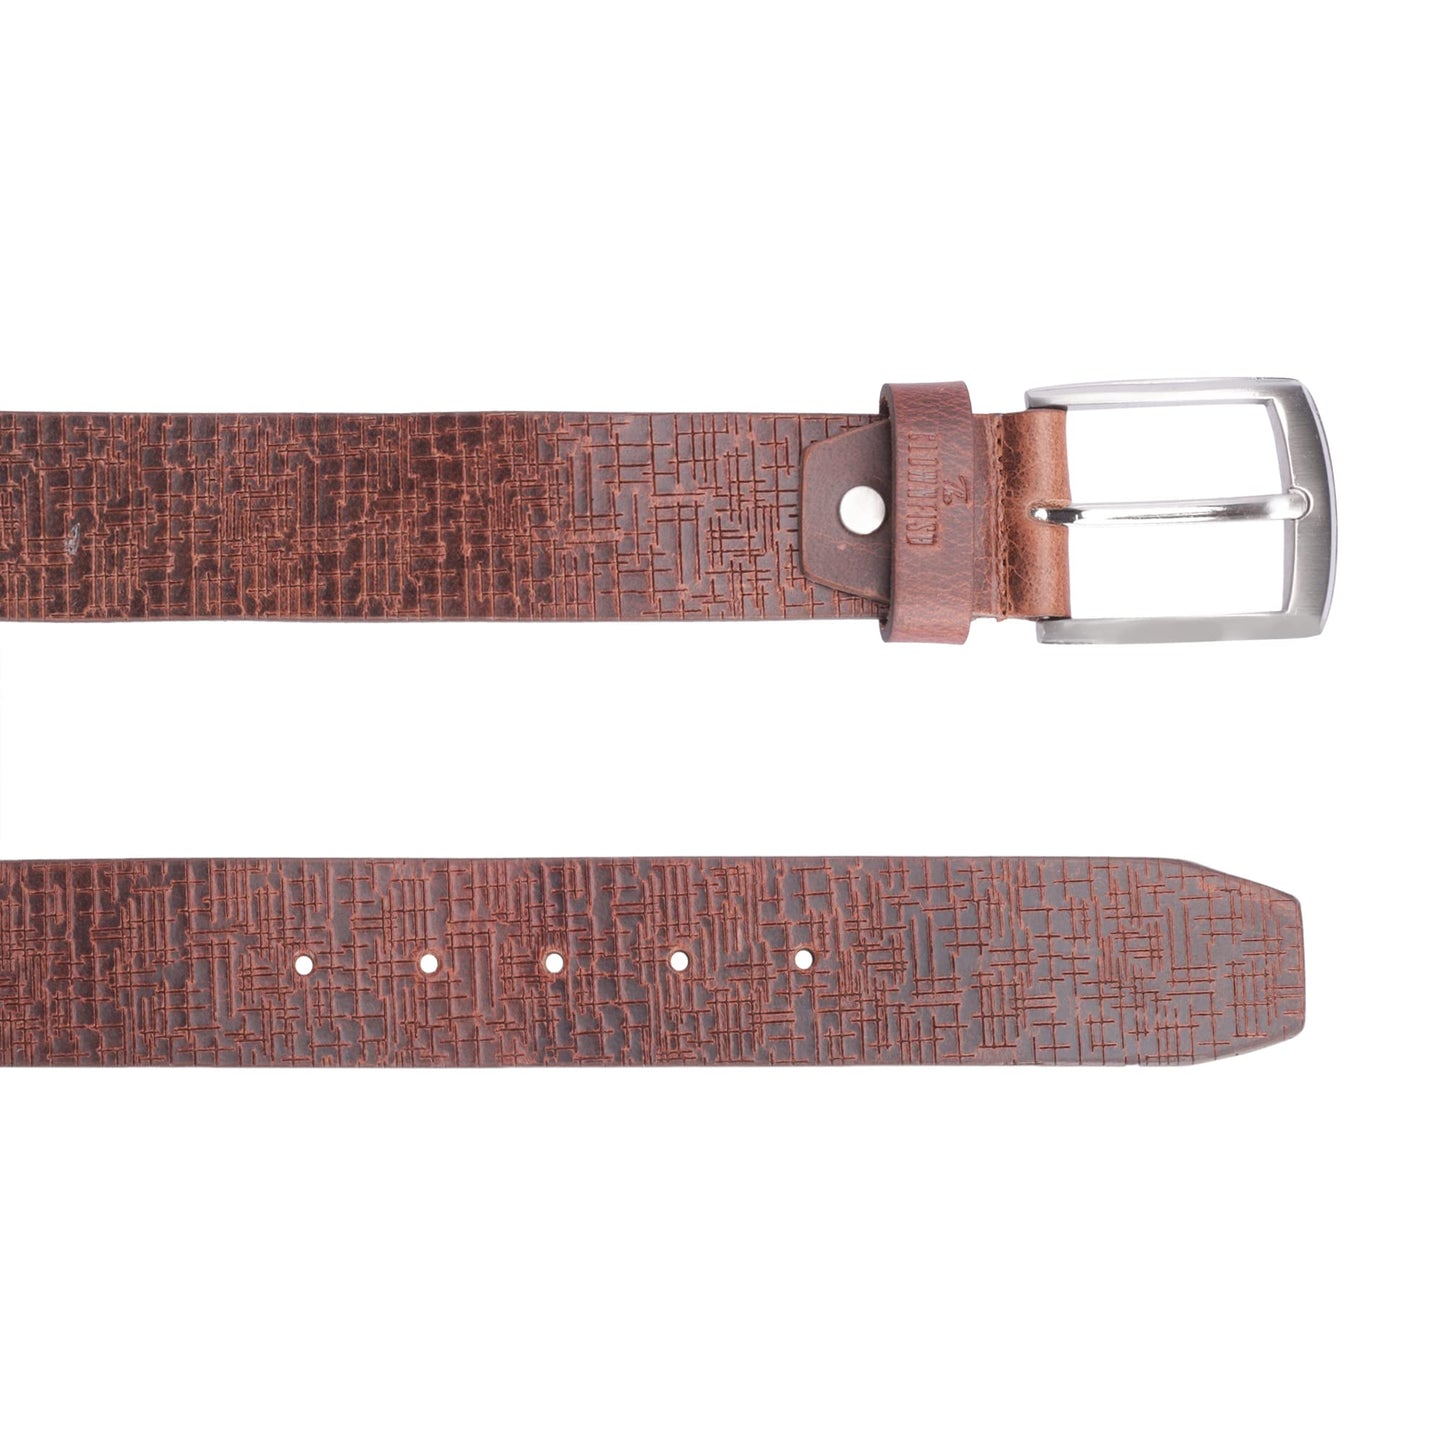 THE CLOWNFISH Men's Genuine Leather Belt with Textured Design- Tan (Size-36 inches)